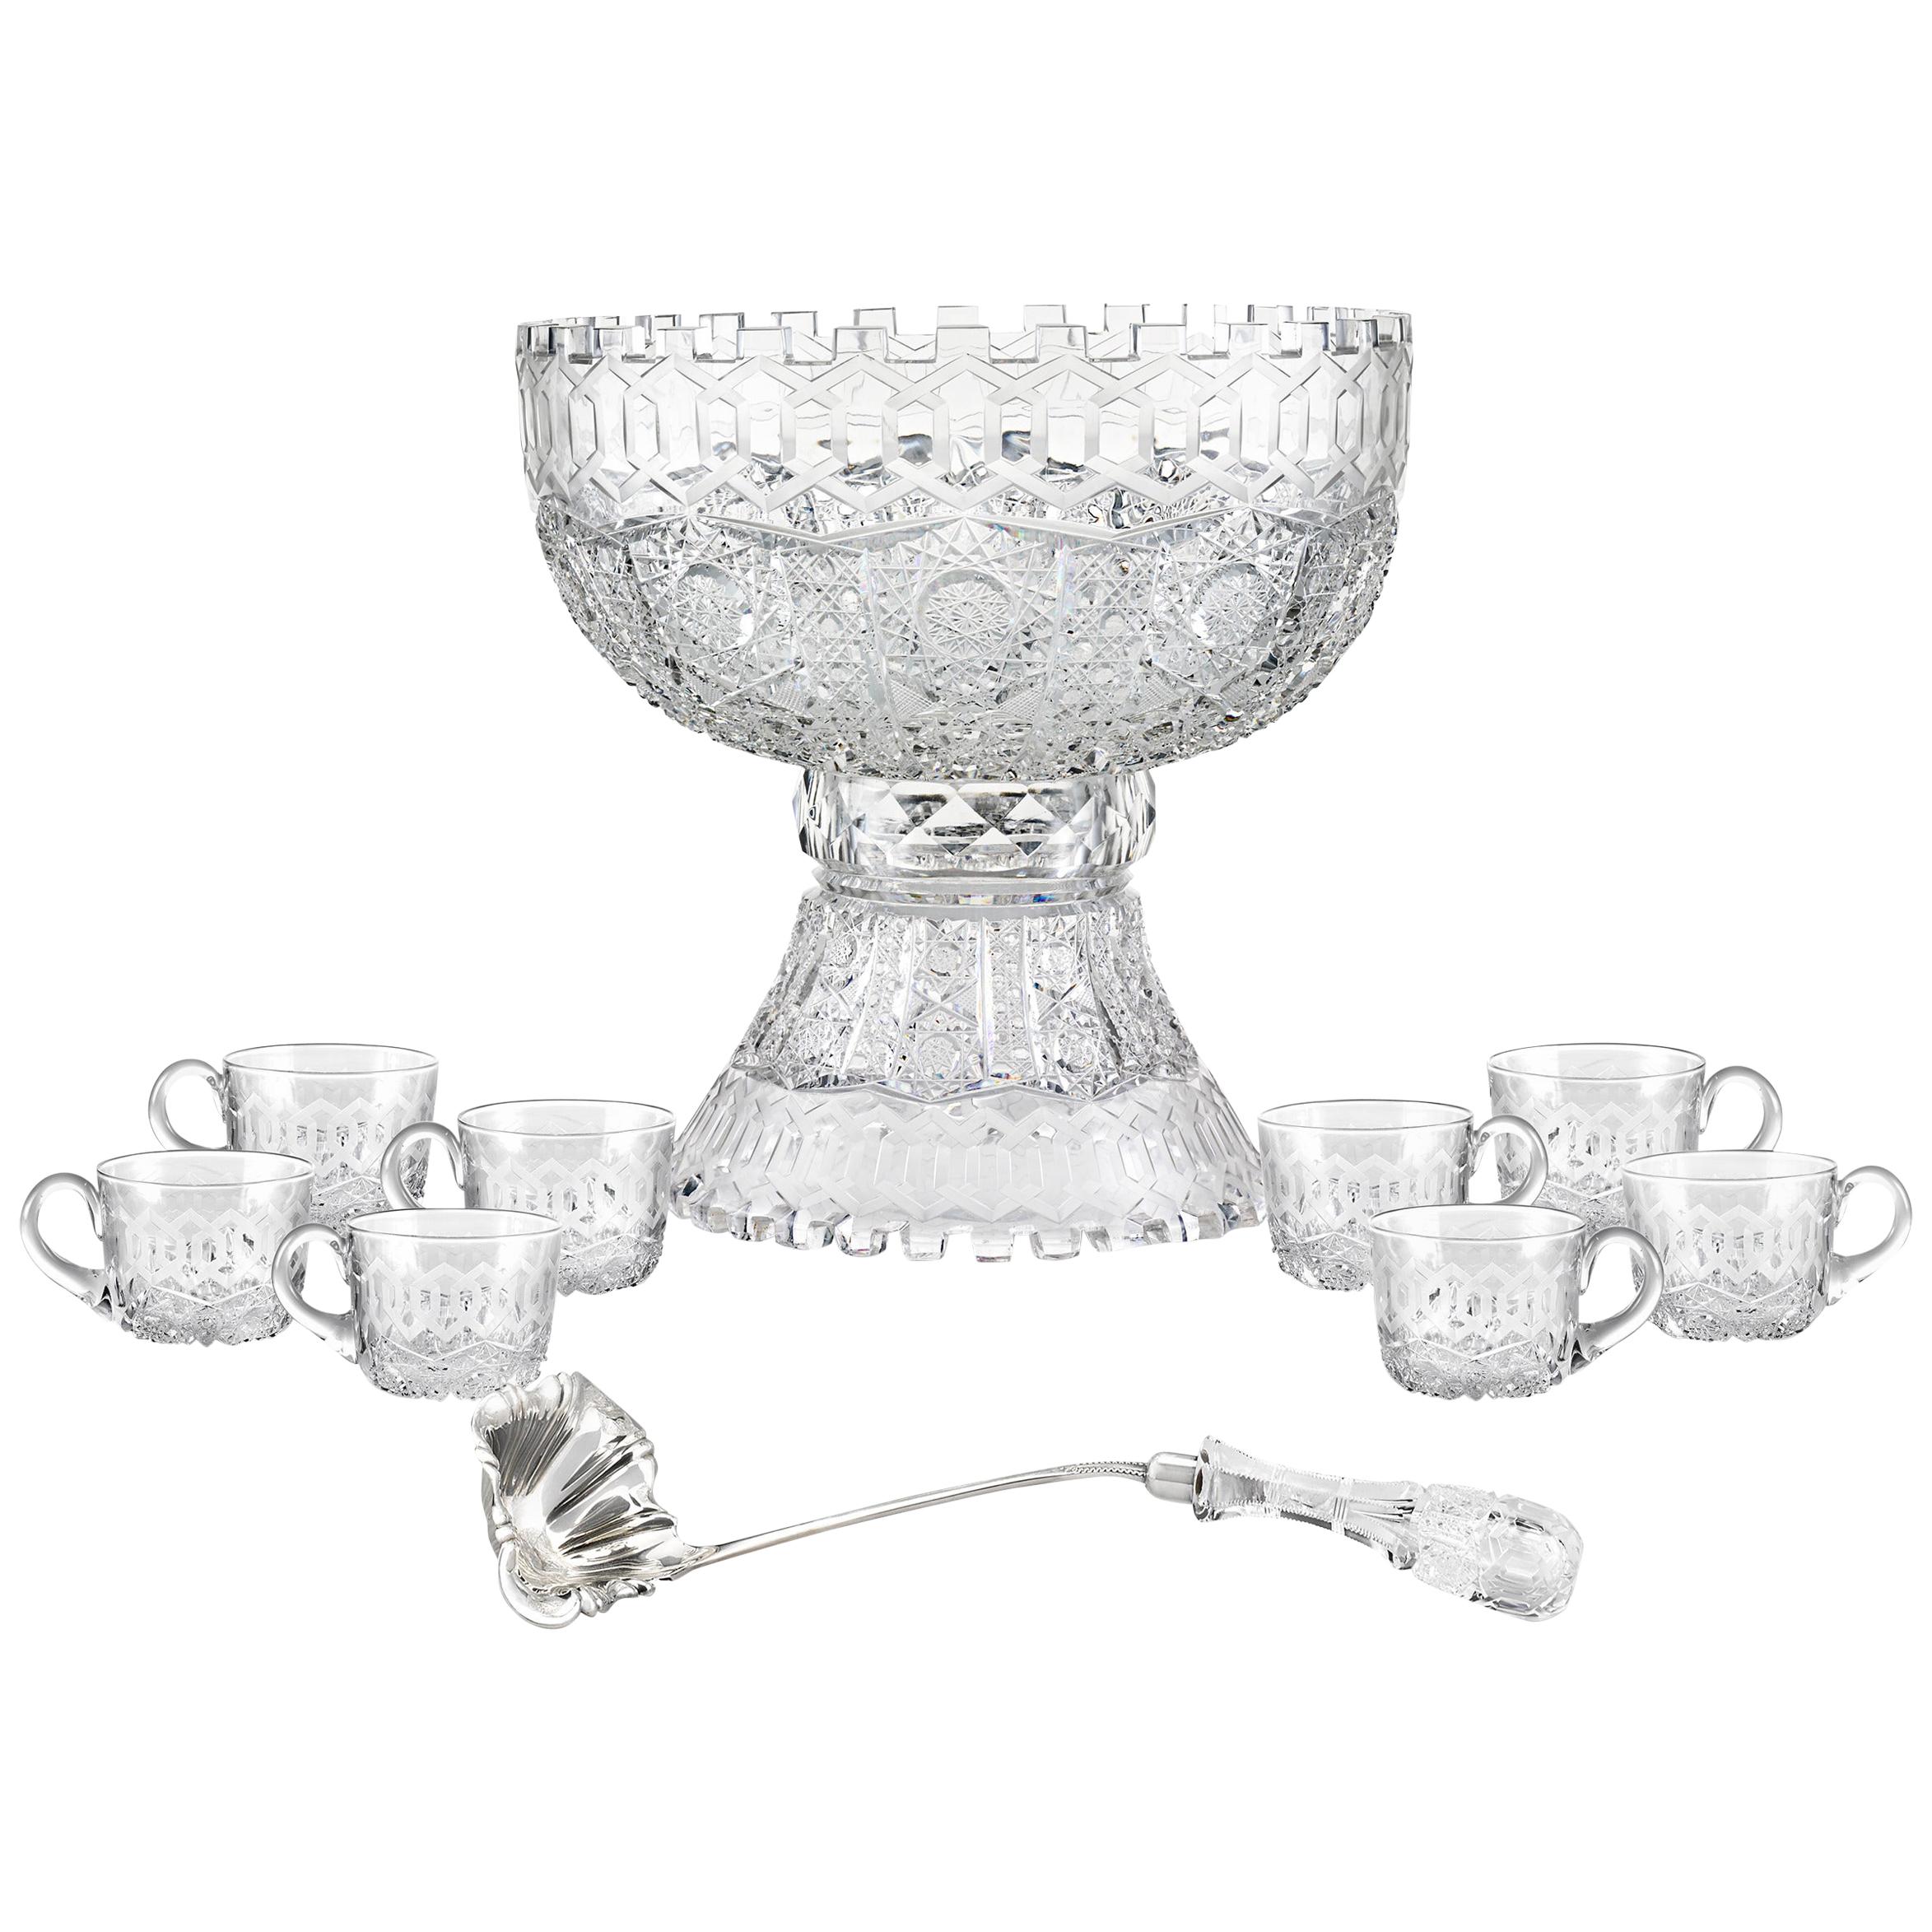 Alhambra Brilliant Period Cut-Glass Punch Bowl Set by Meriden